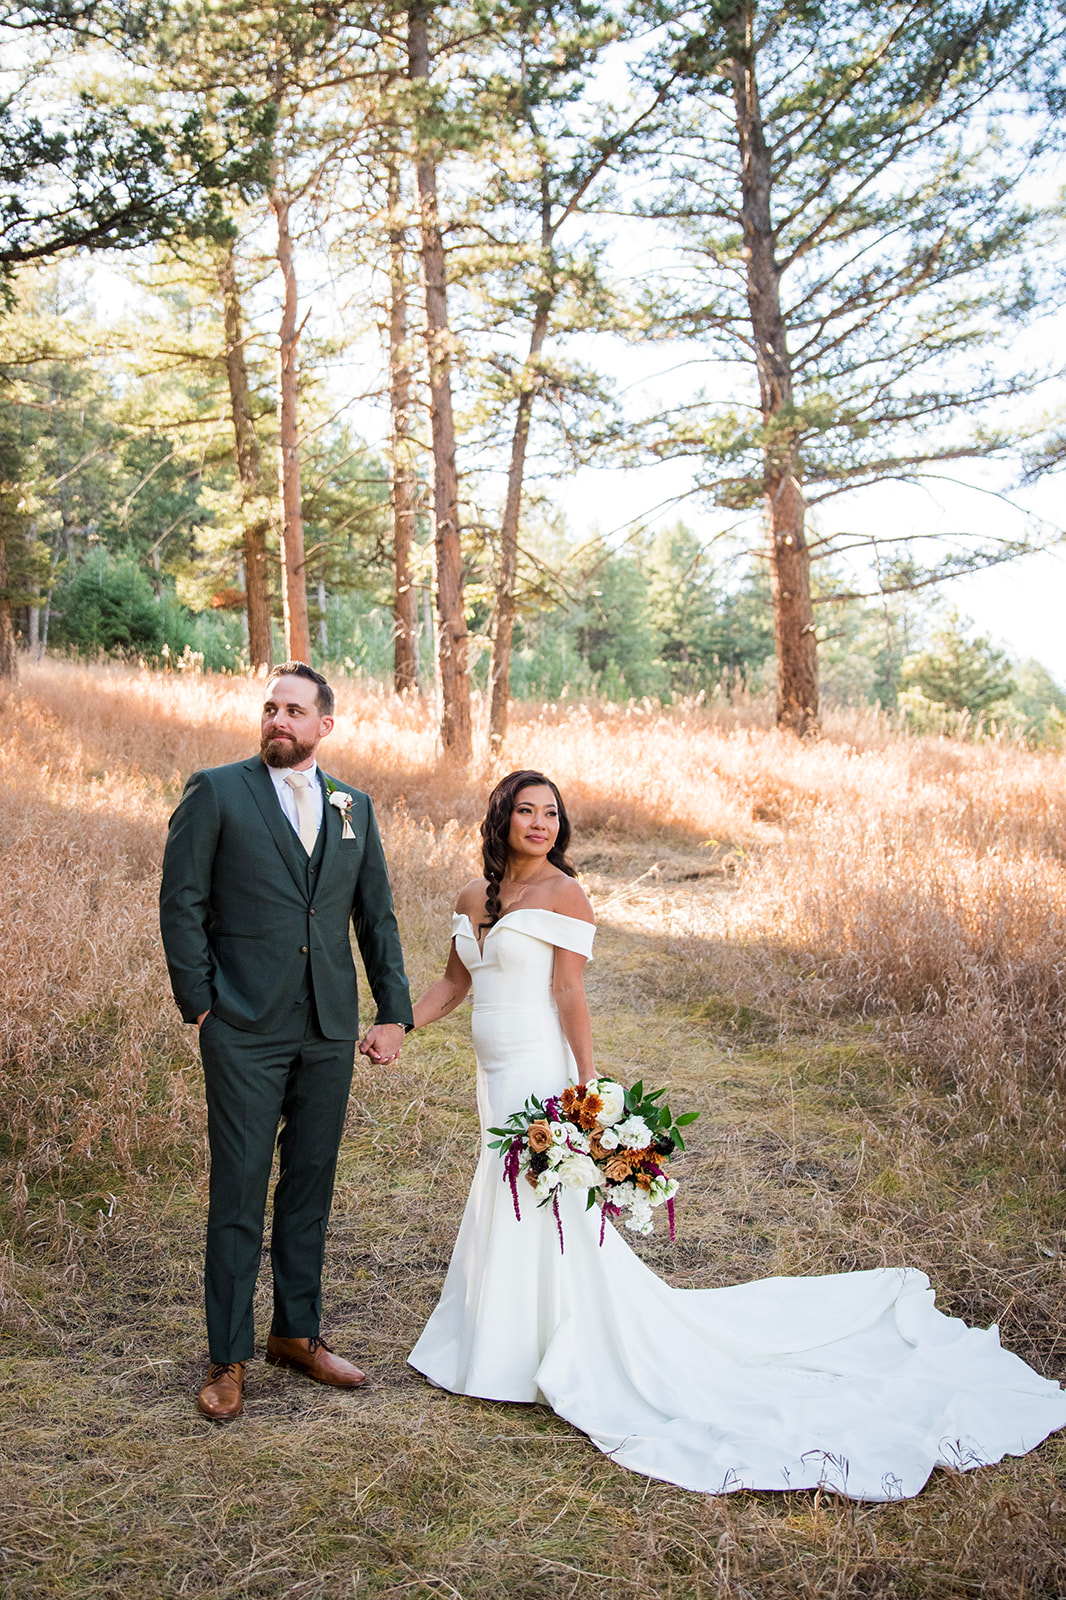 A bride and groom look seriously in opposite directions, standing in the pine forest at The Pines at Genesee.